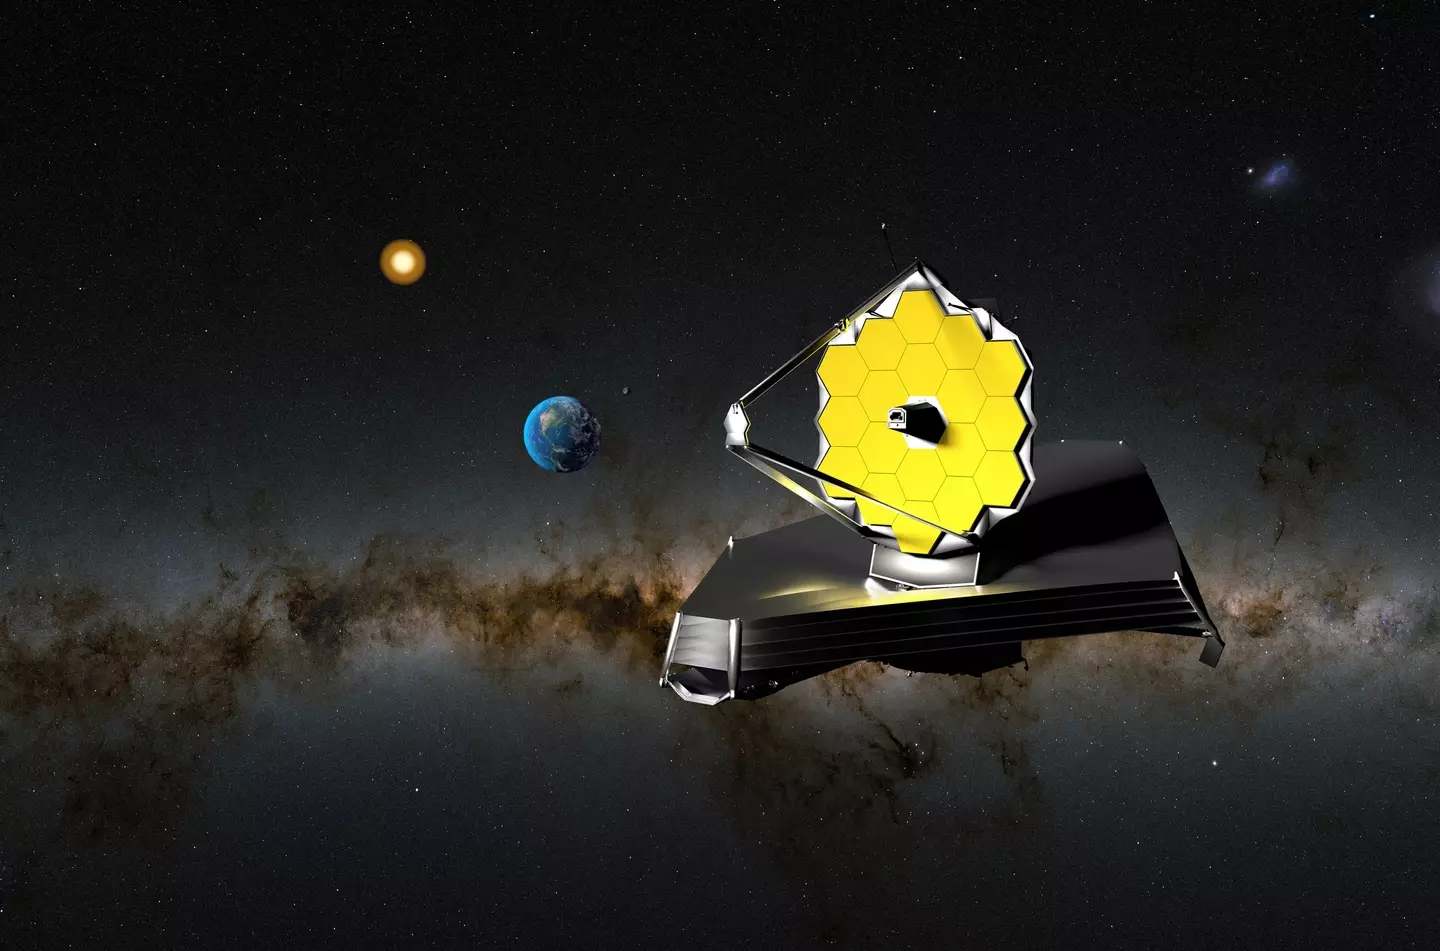 The James Webb telescope has made some important discoveries.